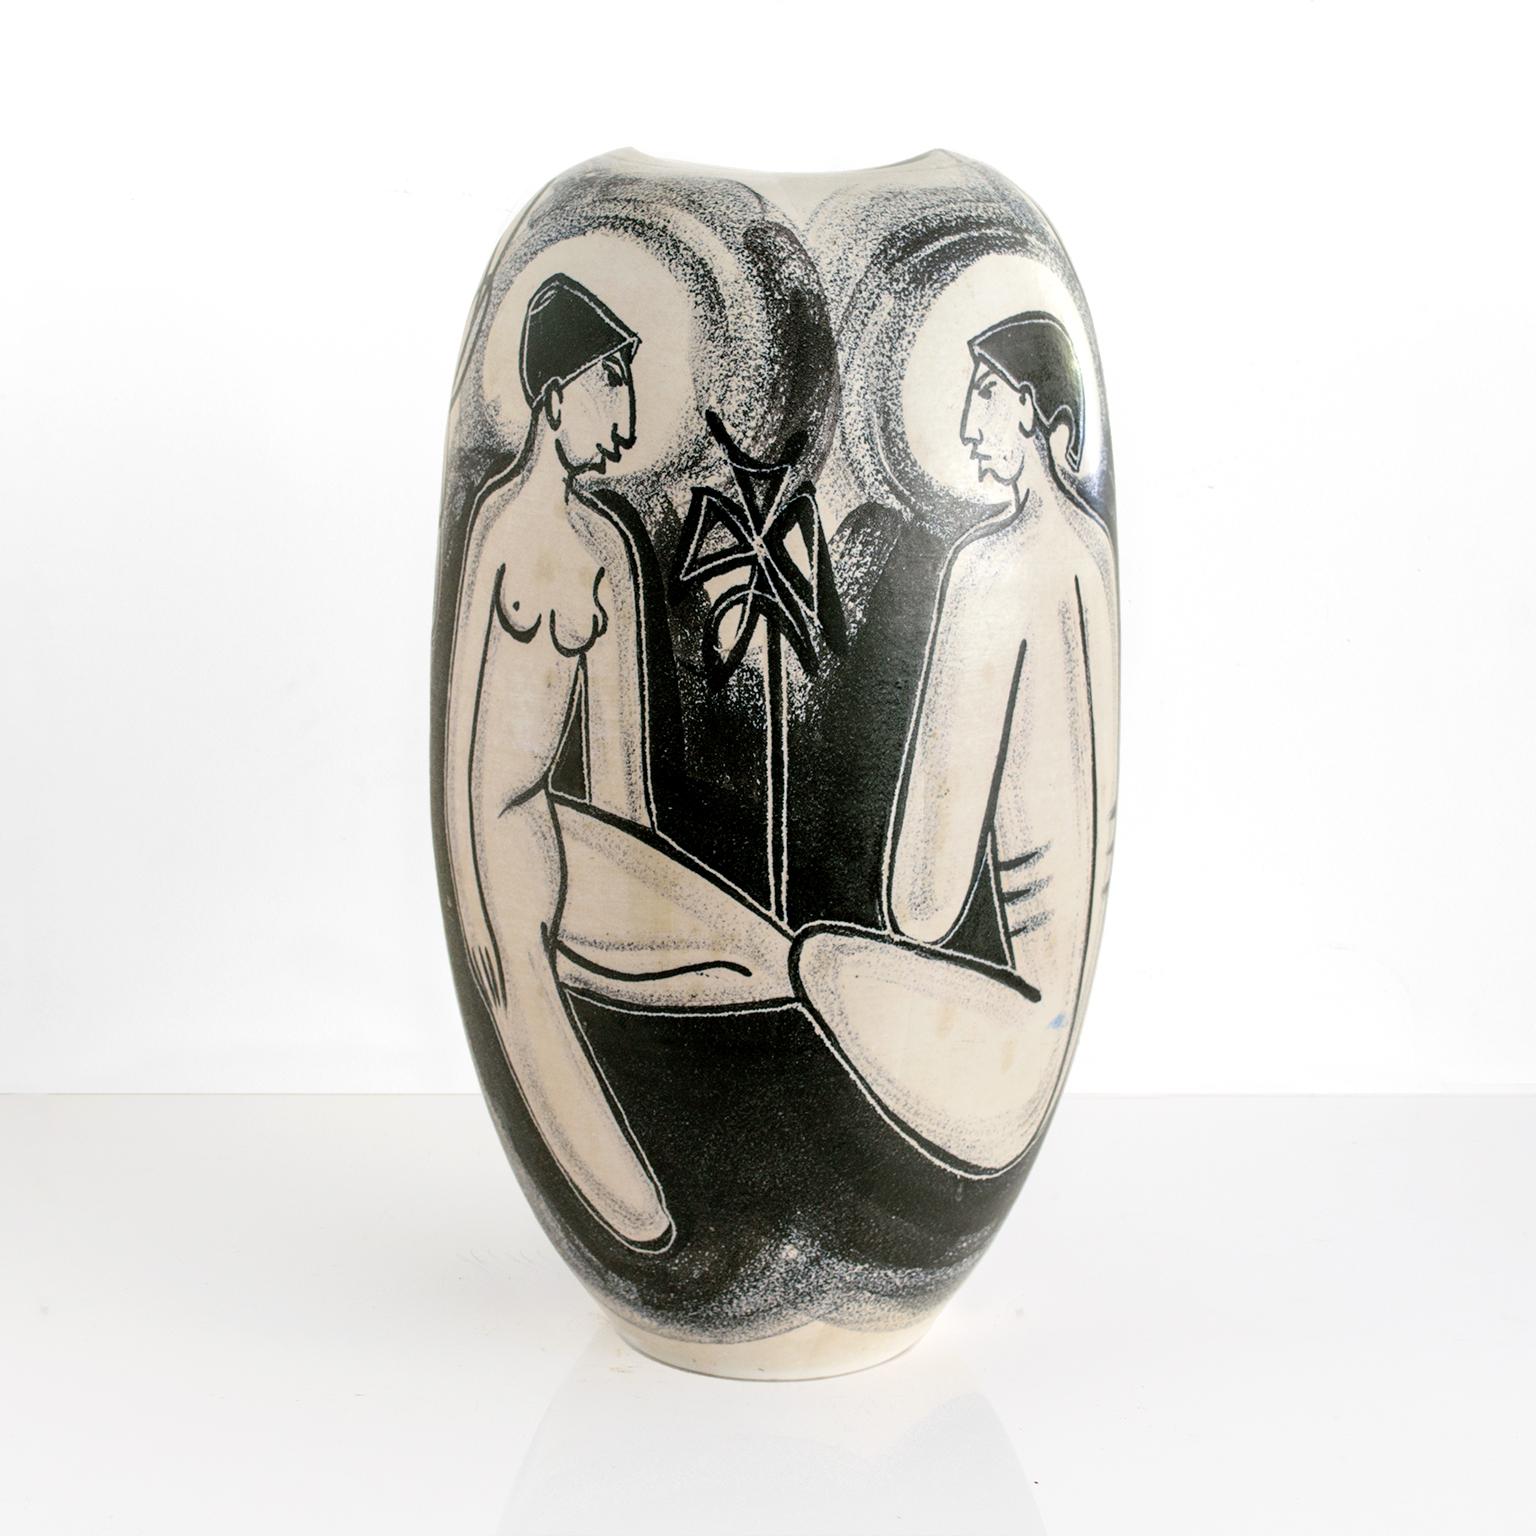 Scandinavian Modern, hand decorated ceramic vase by Danish artist Mette Doller on a form by Erik Ivarsson. Produced for the Swedish company Andersson & Johansson - Höganäs Ceramic, circa 1950's. The vase artistically depicts four figures possibly